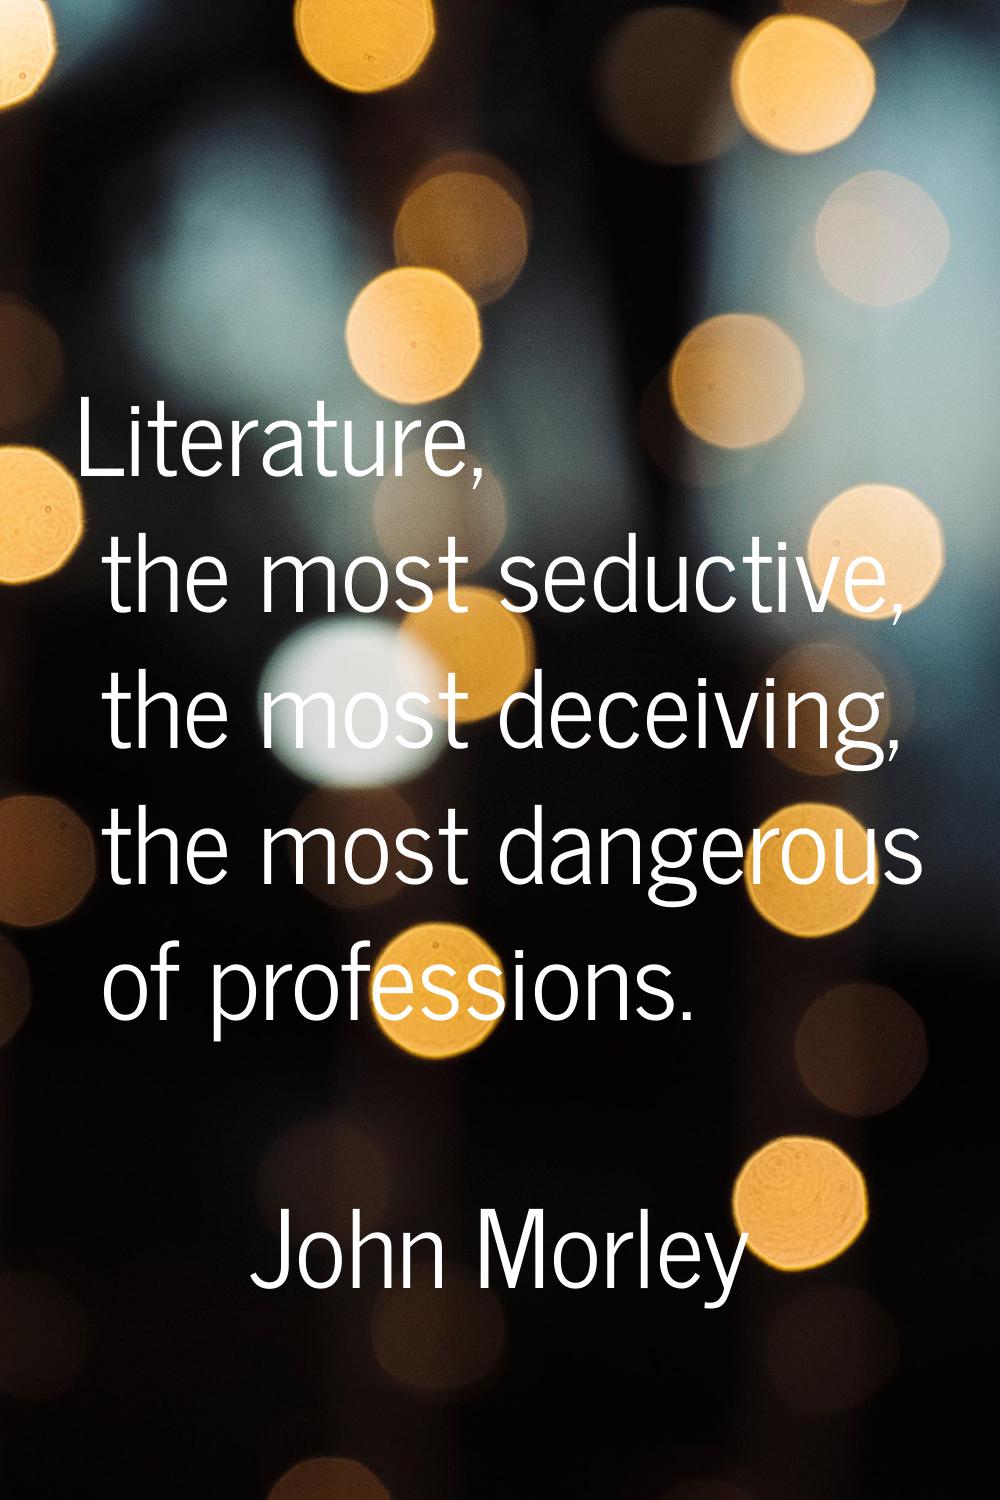 Literature, the most seductive, the most deceiving, the most dangerous of professions.